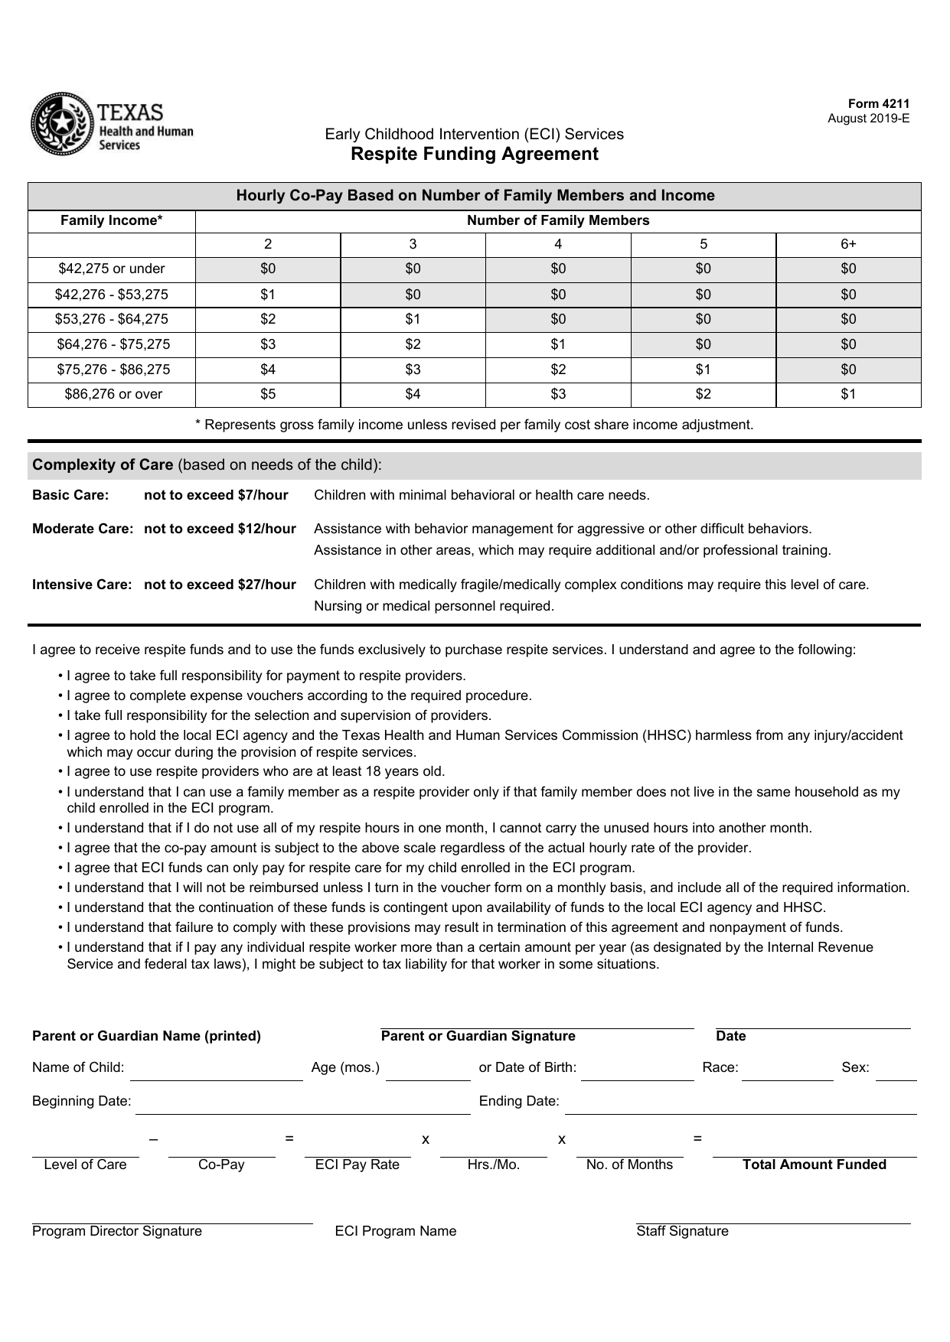 Form 4211 Respite Funding Agreement - Texas, Page 1